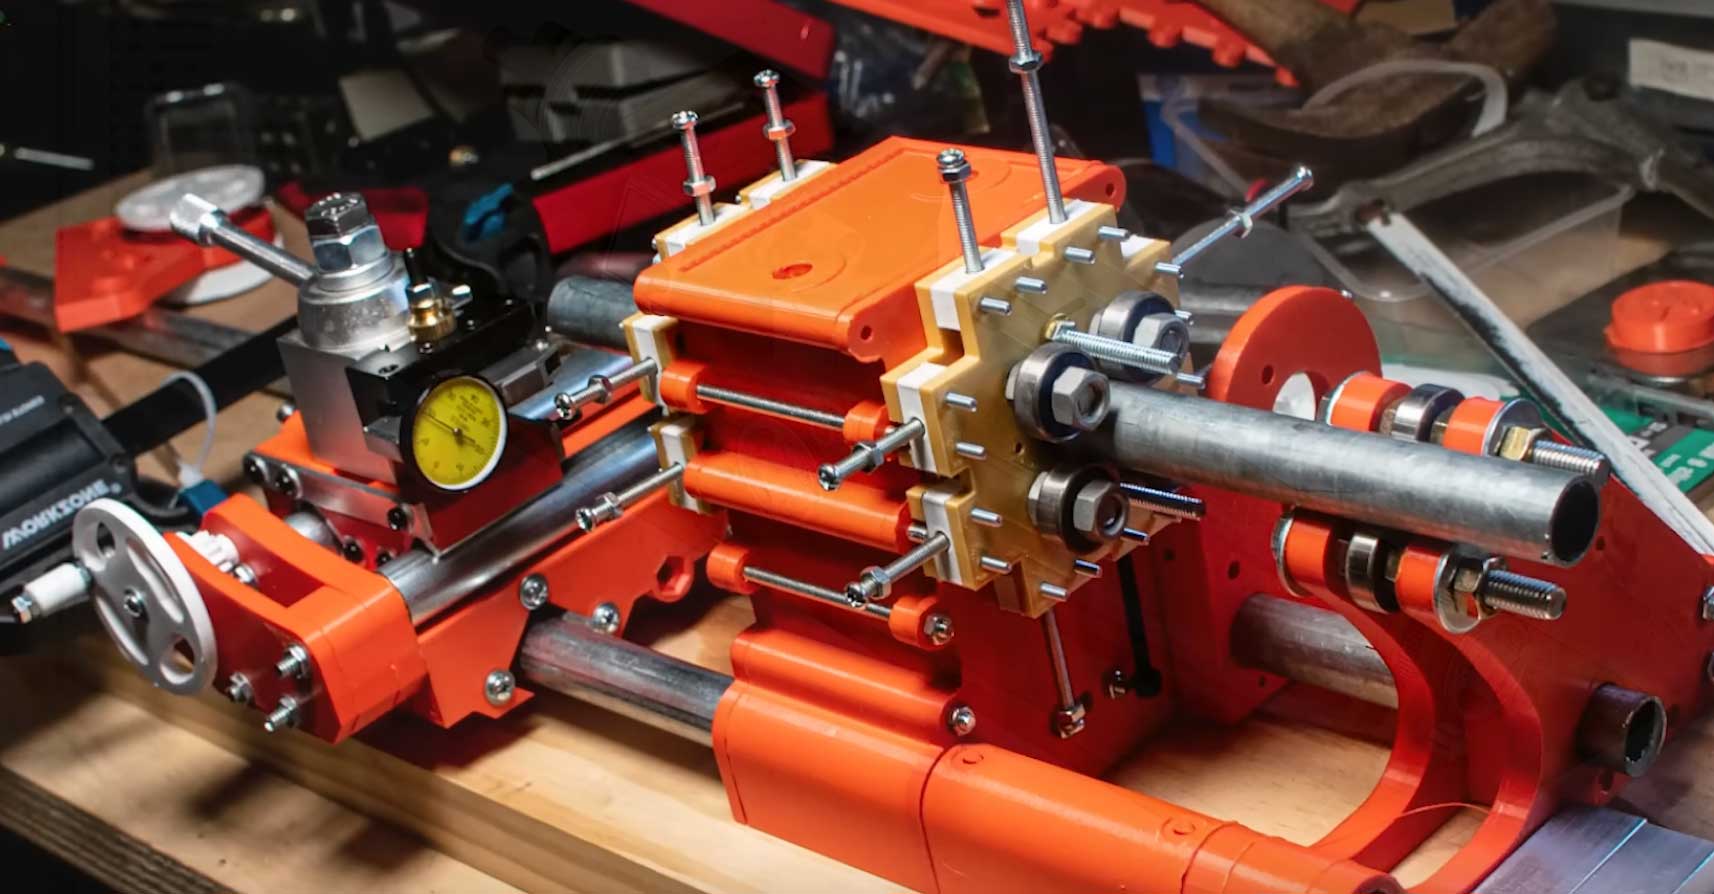 A YouTube user presents a small 3D printed metalworking lathe